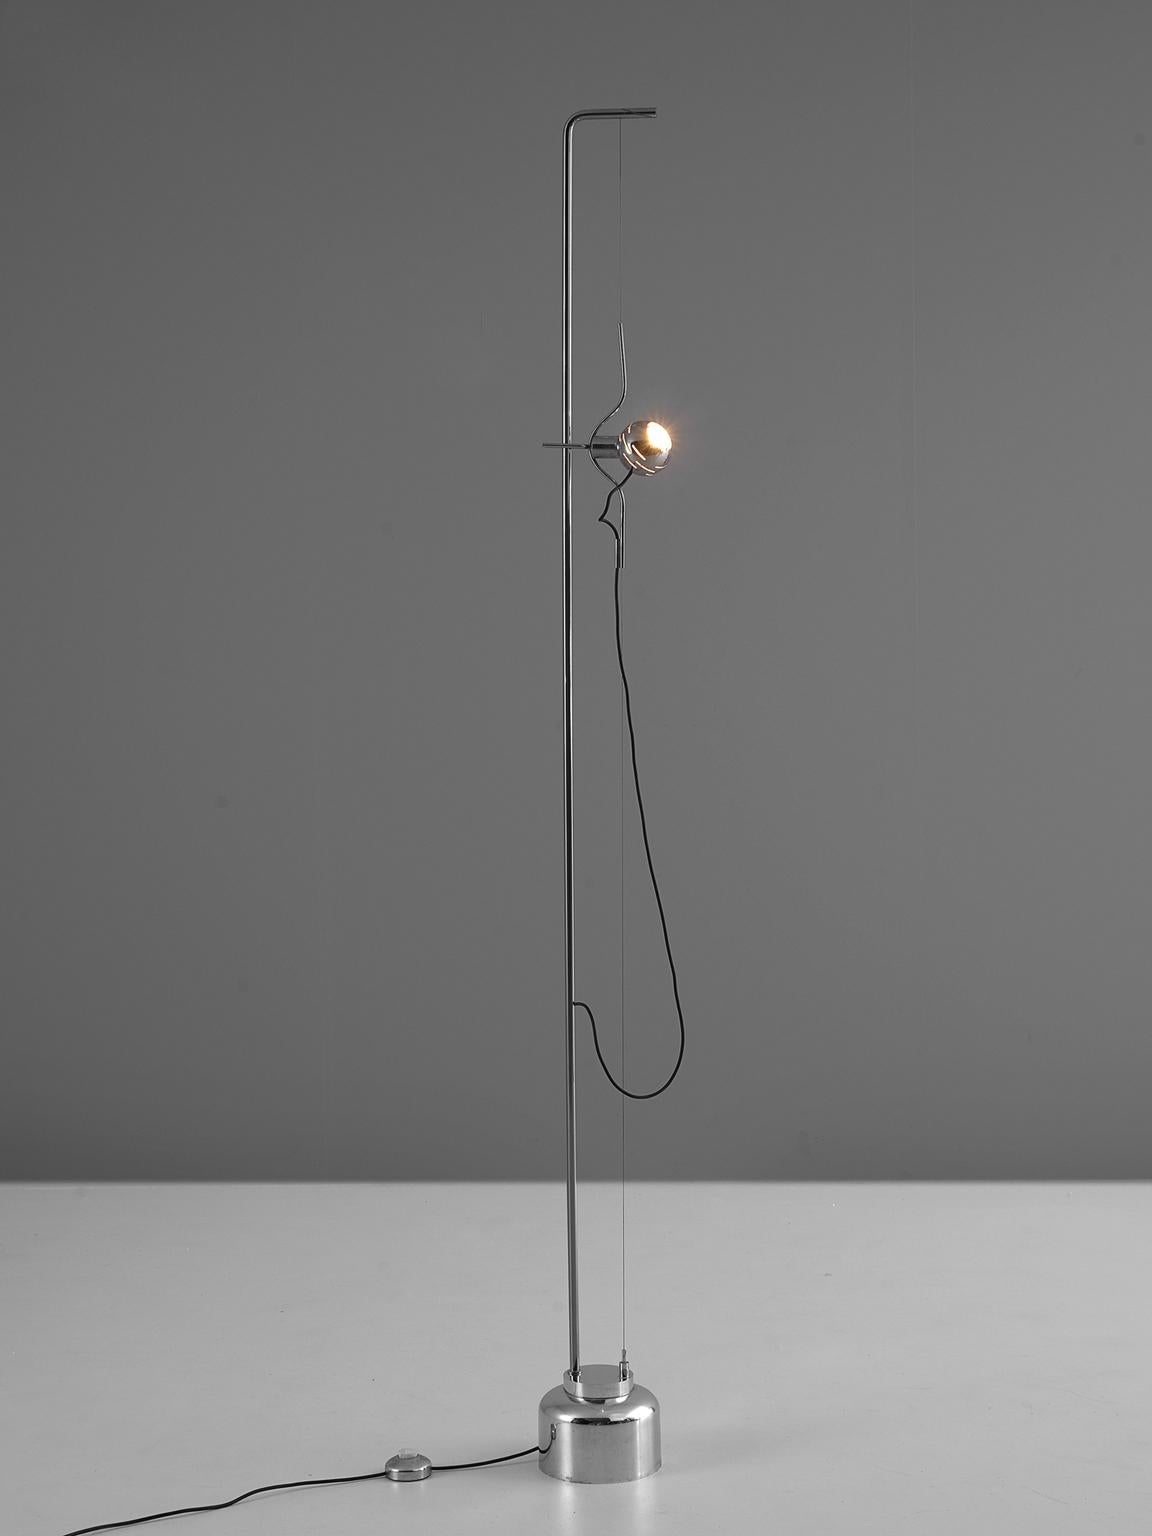 Angelo Lelli for Arredoluce, Filosfera floor lamp, chromium-plated metal, metal wire, painted metal. Italy, 1970s. 

This playful chrome and metal floor lamp comes has an adjustable chrome globe. This globe can slide up and down the wire. The lamp